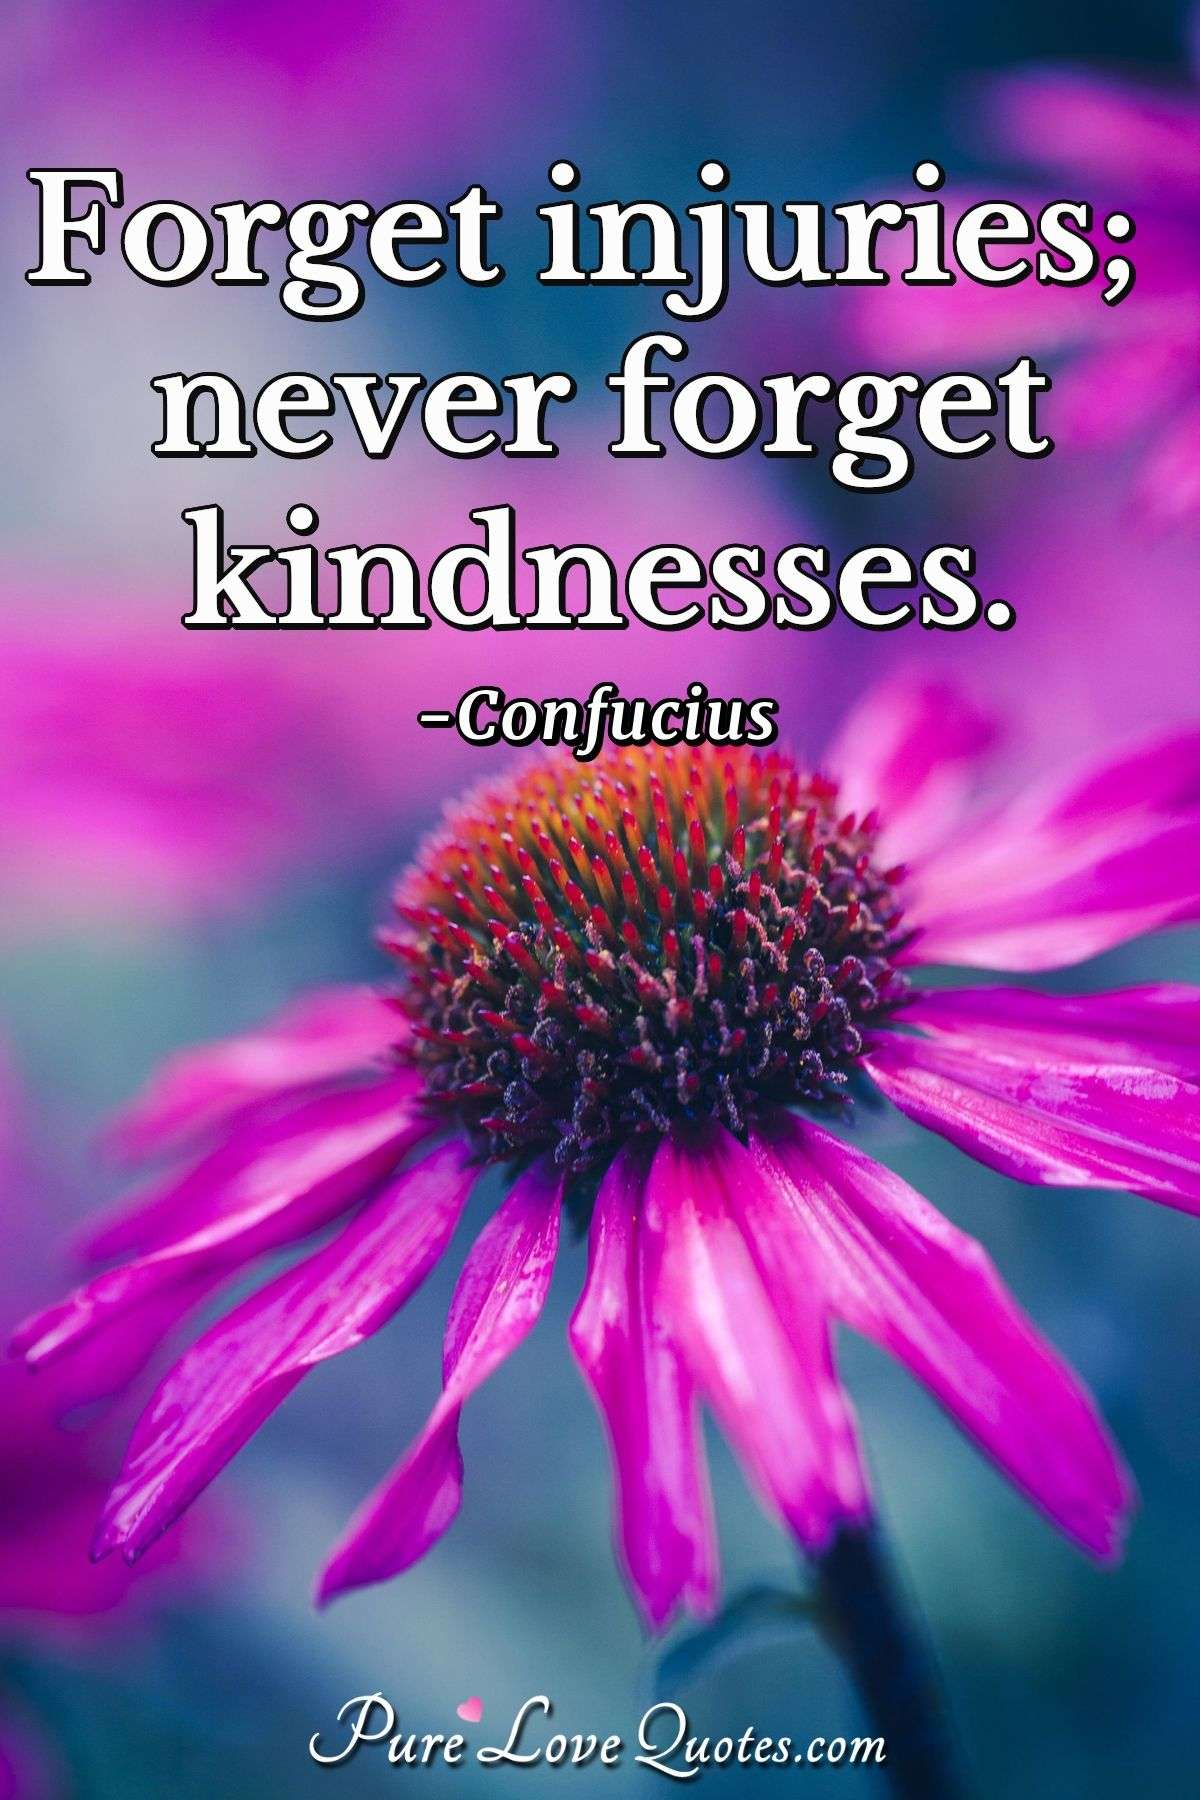 Forget injuries; never forget kindnesses. - Confucius